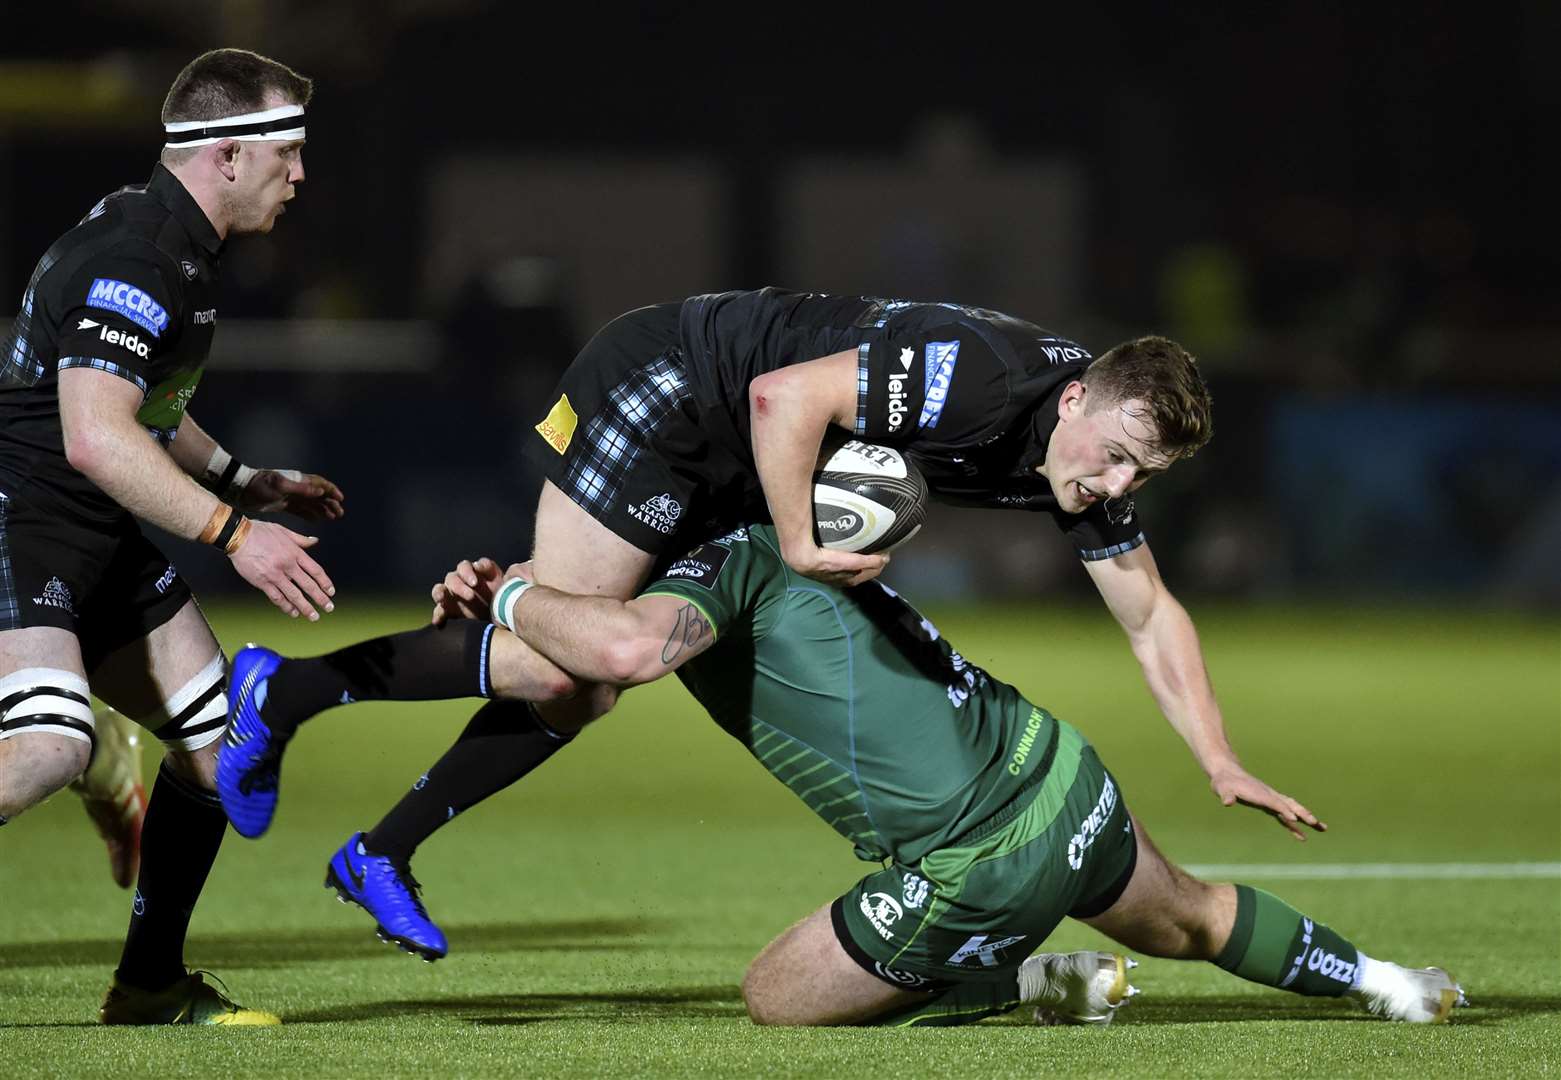 Kelly made his first start for the Warriors in the 43-17 win against Connacht in February this year.